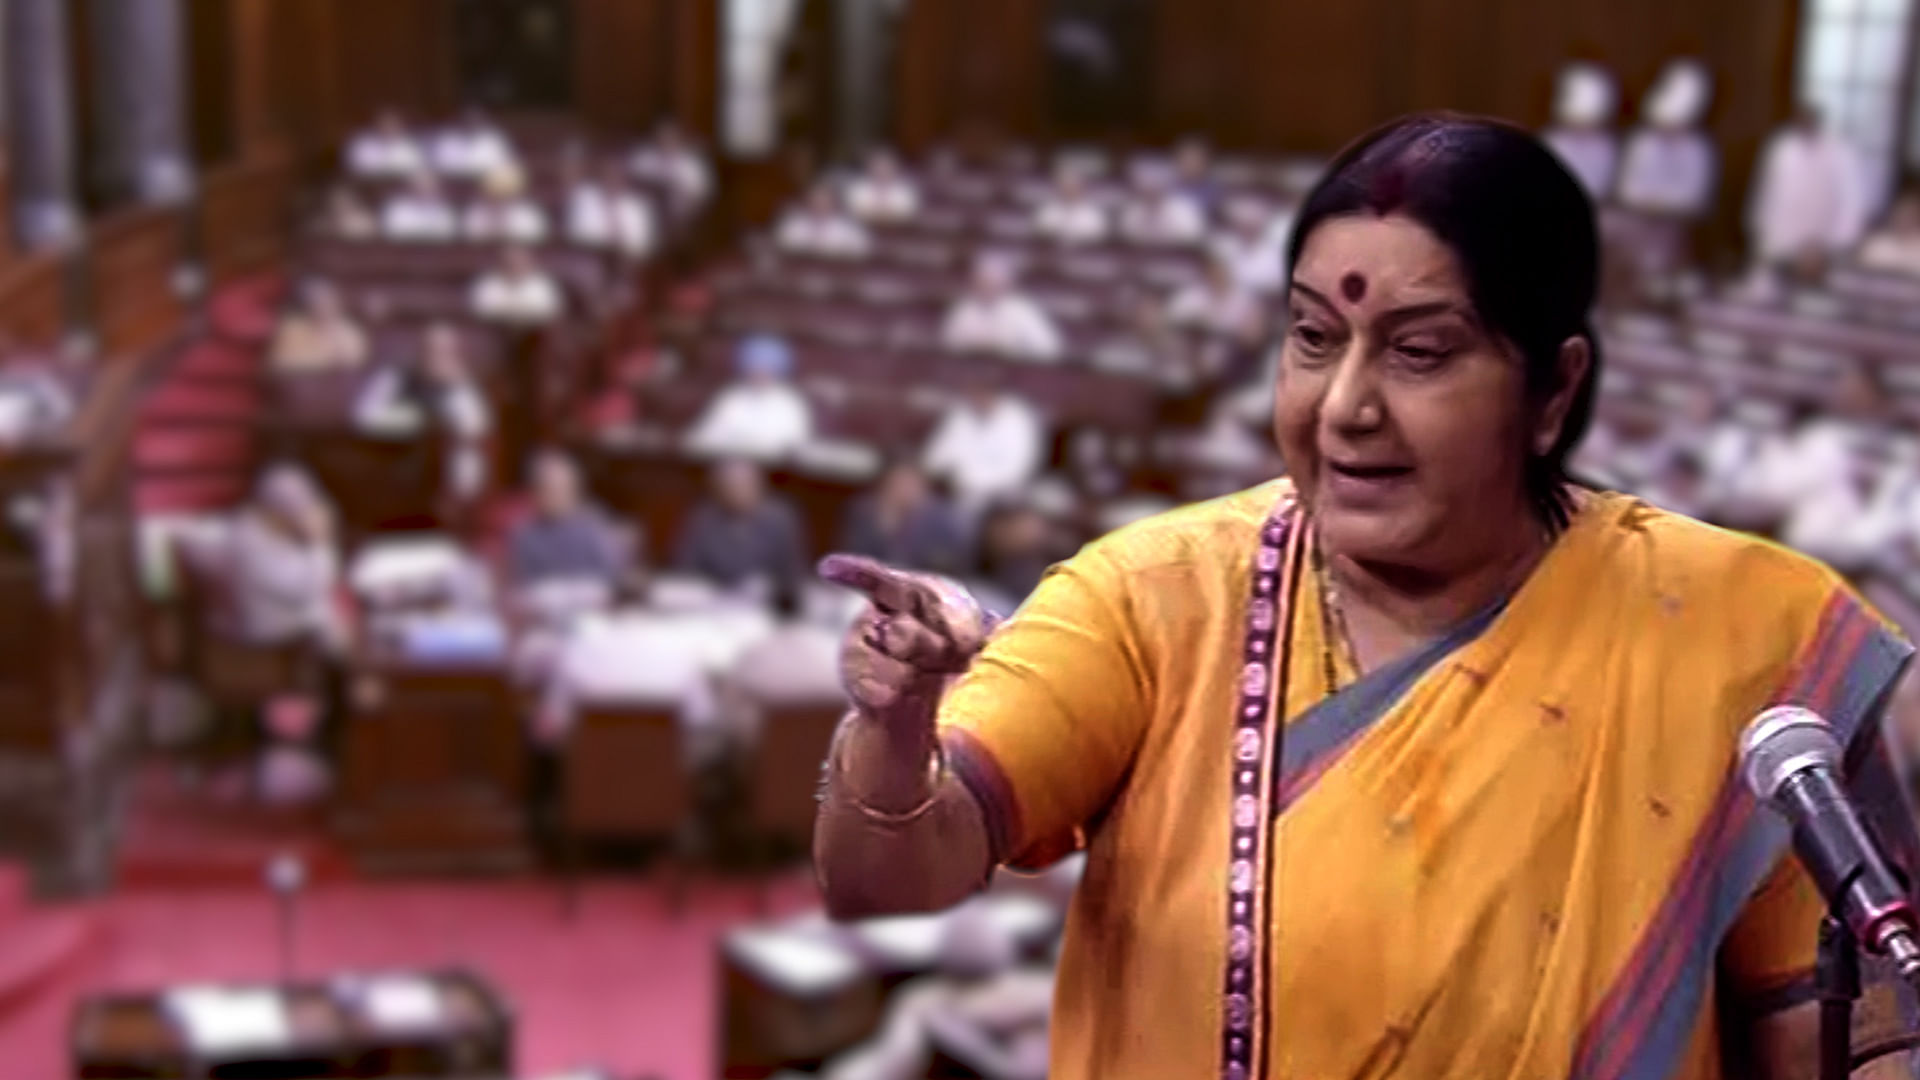 Sushma Swaraj addressed the Upper House on the Doklam standoff and other foreign policy initiatives taken by government of India.